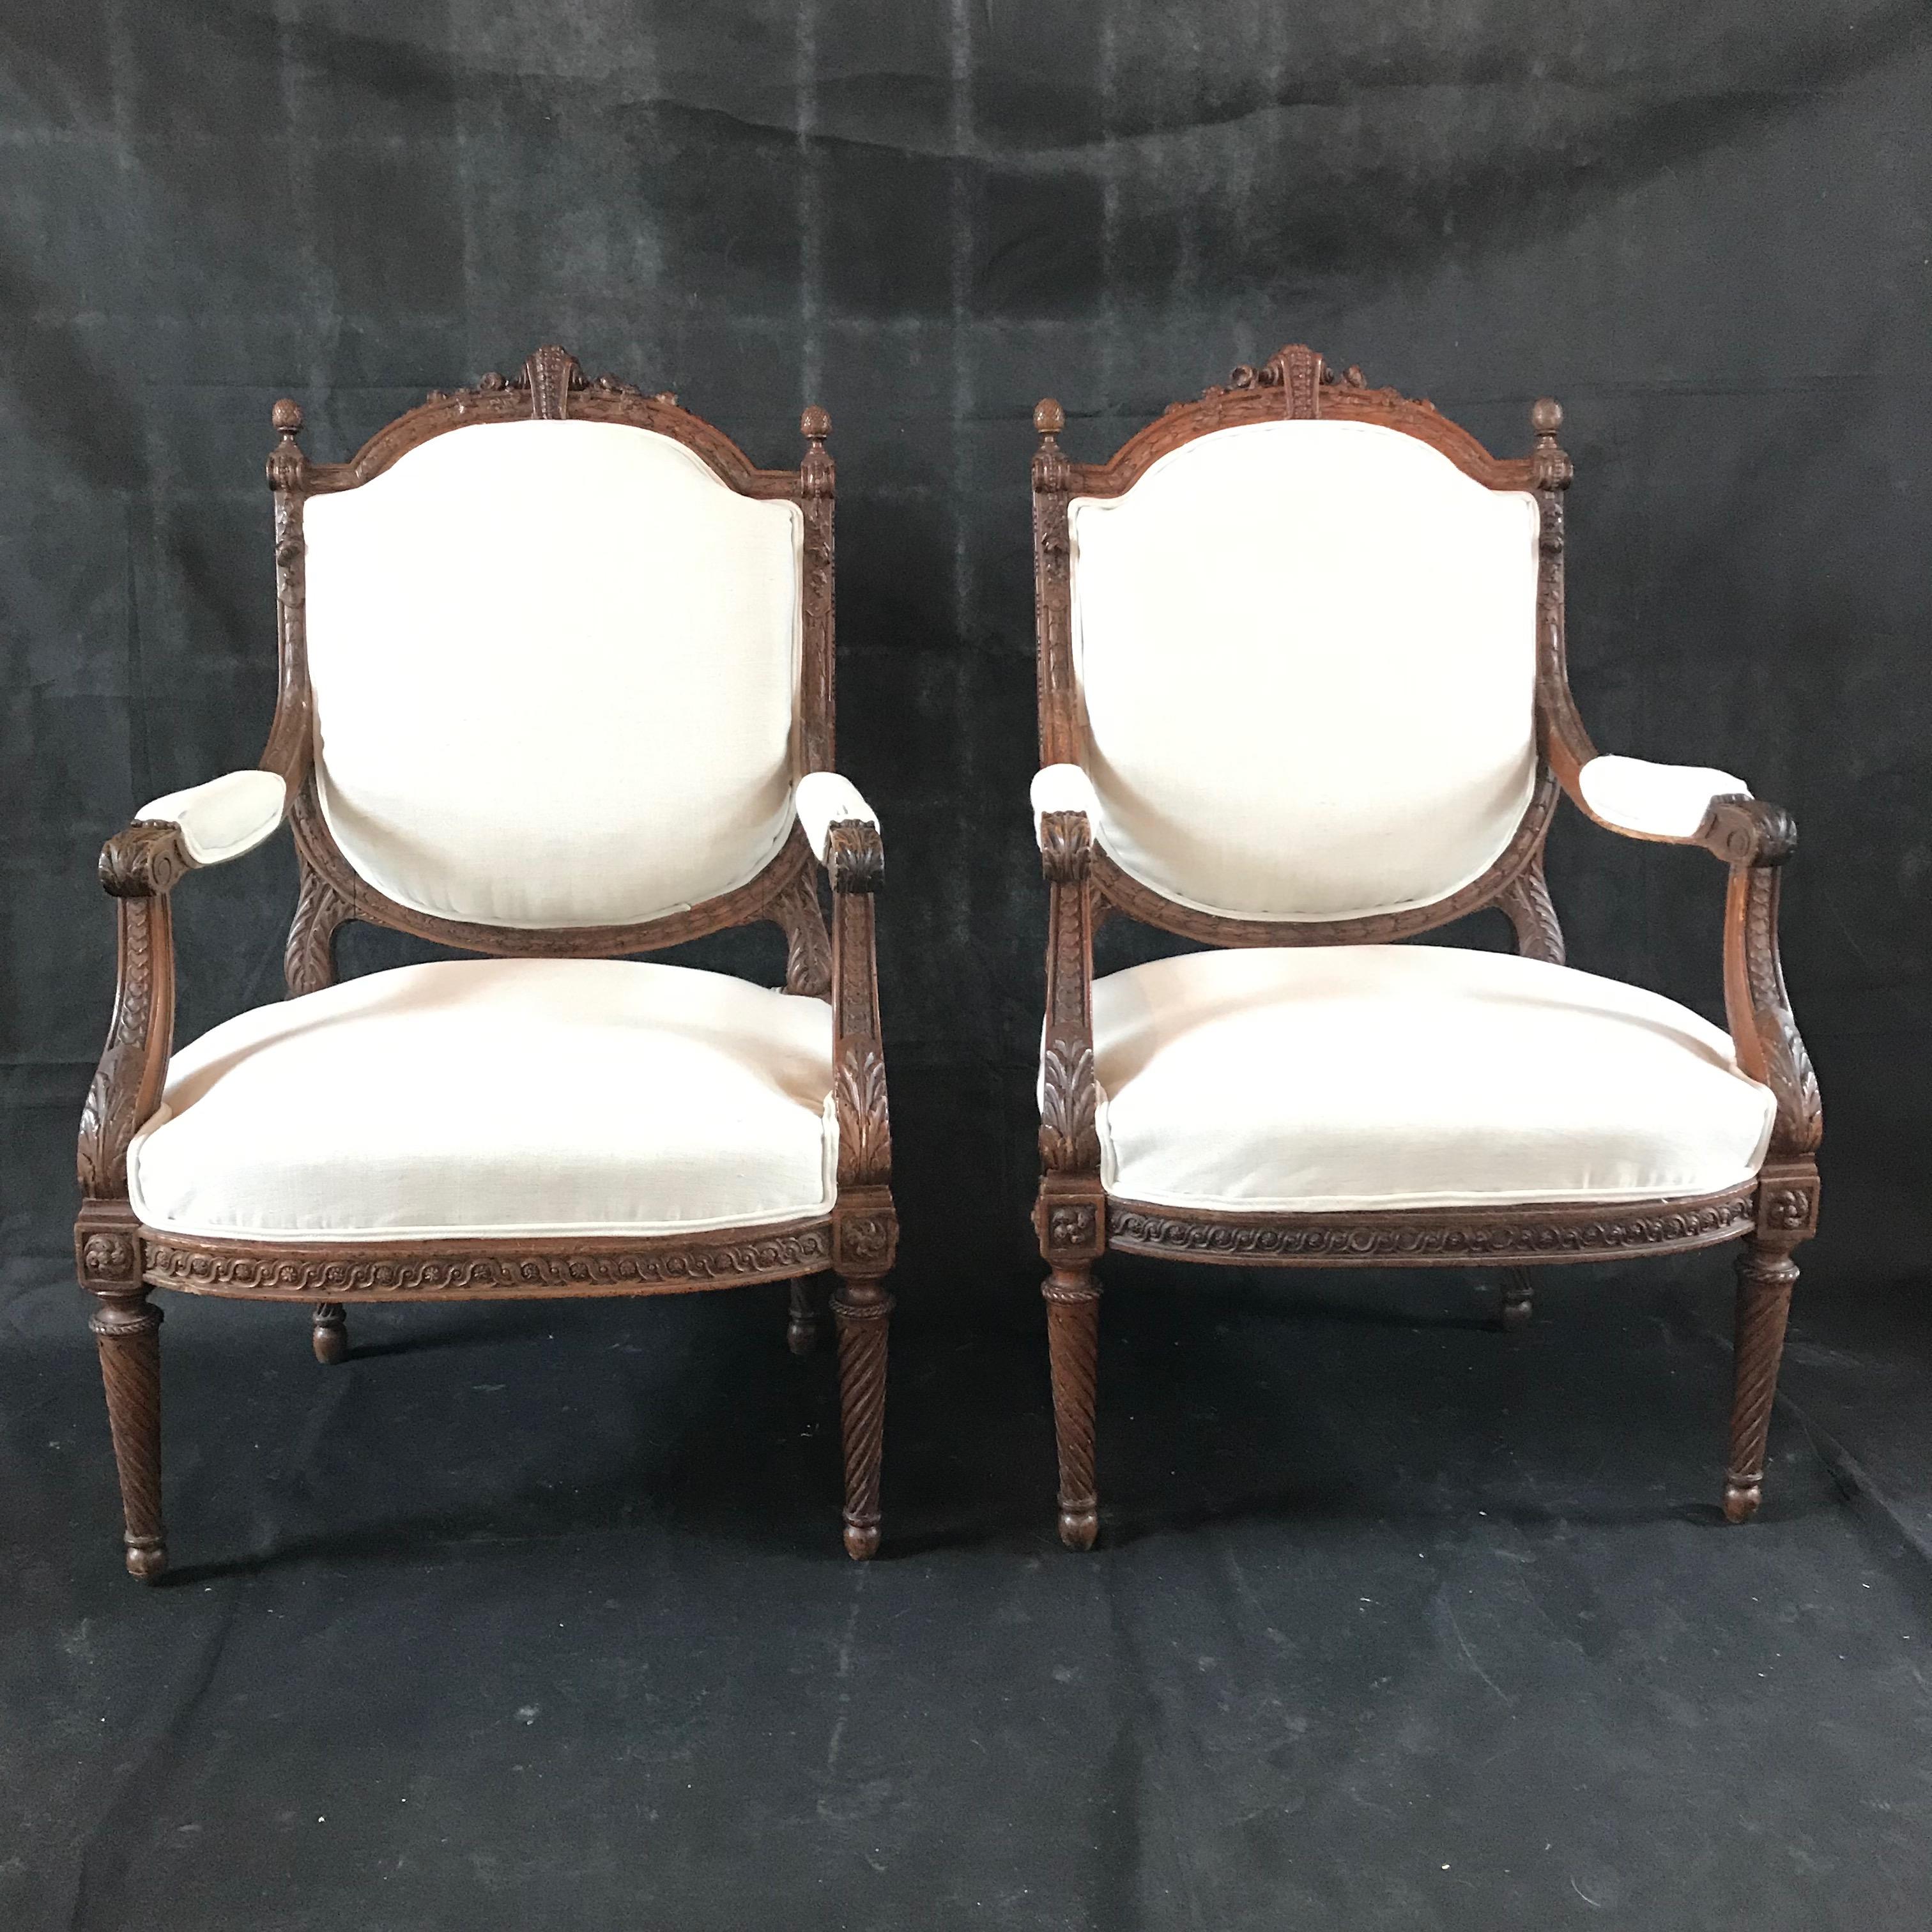 A stunning sturdy pair of elegant French Louis XVI fauteuils armchairs having intricately carved details of flowers, leaves, scrolls, and traditional motif decorative bands. The chairs have been newly professionally upholstered in a French vintage